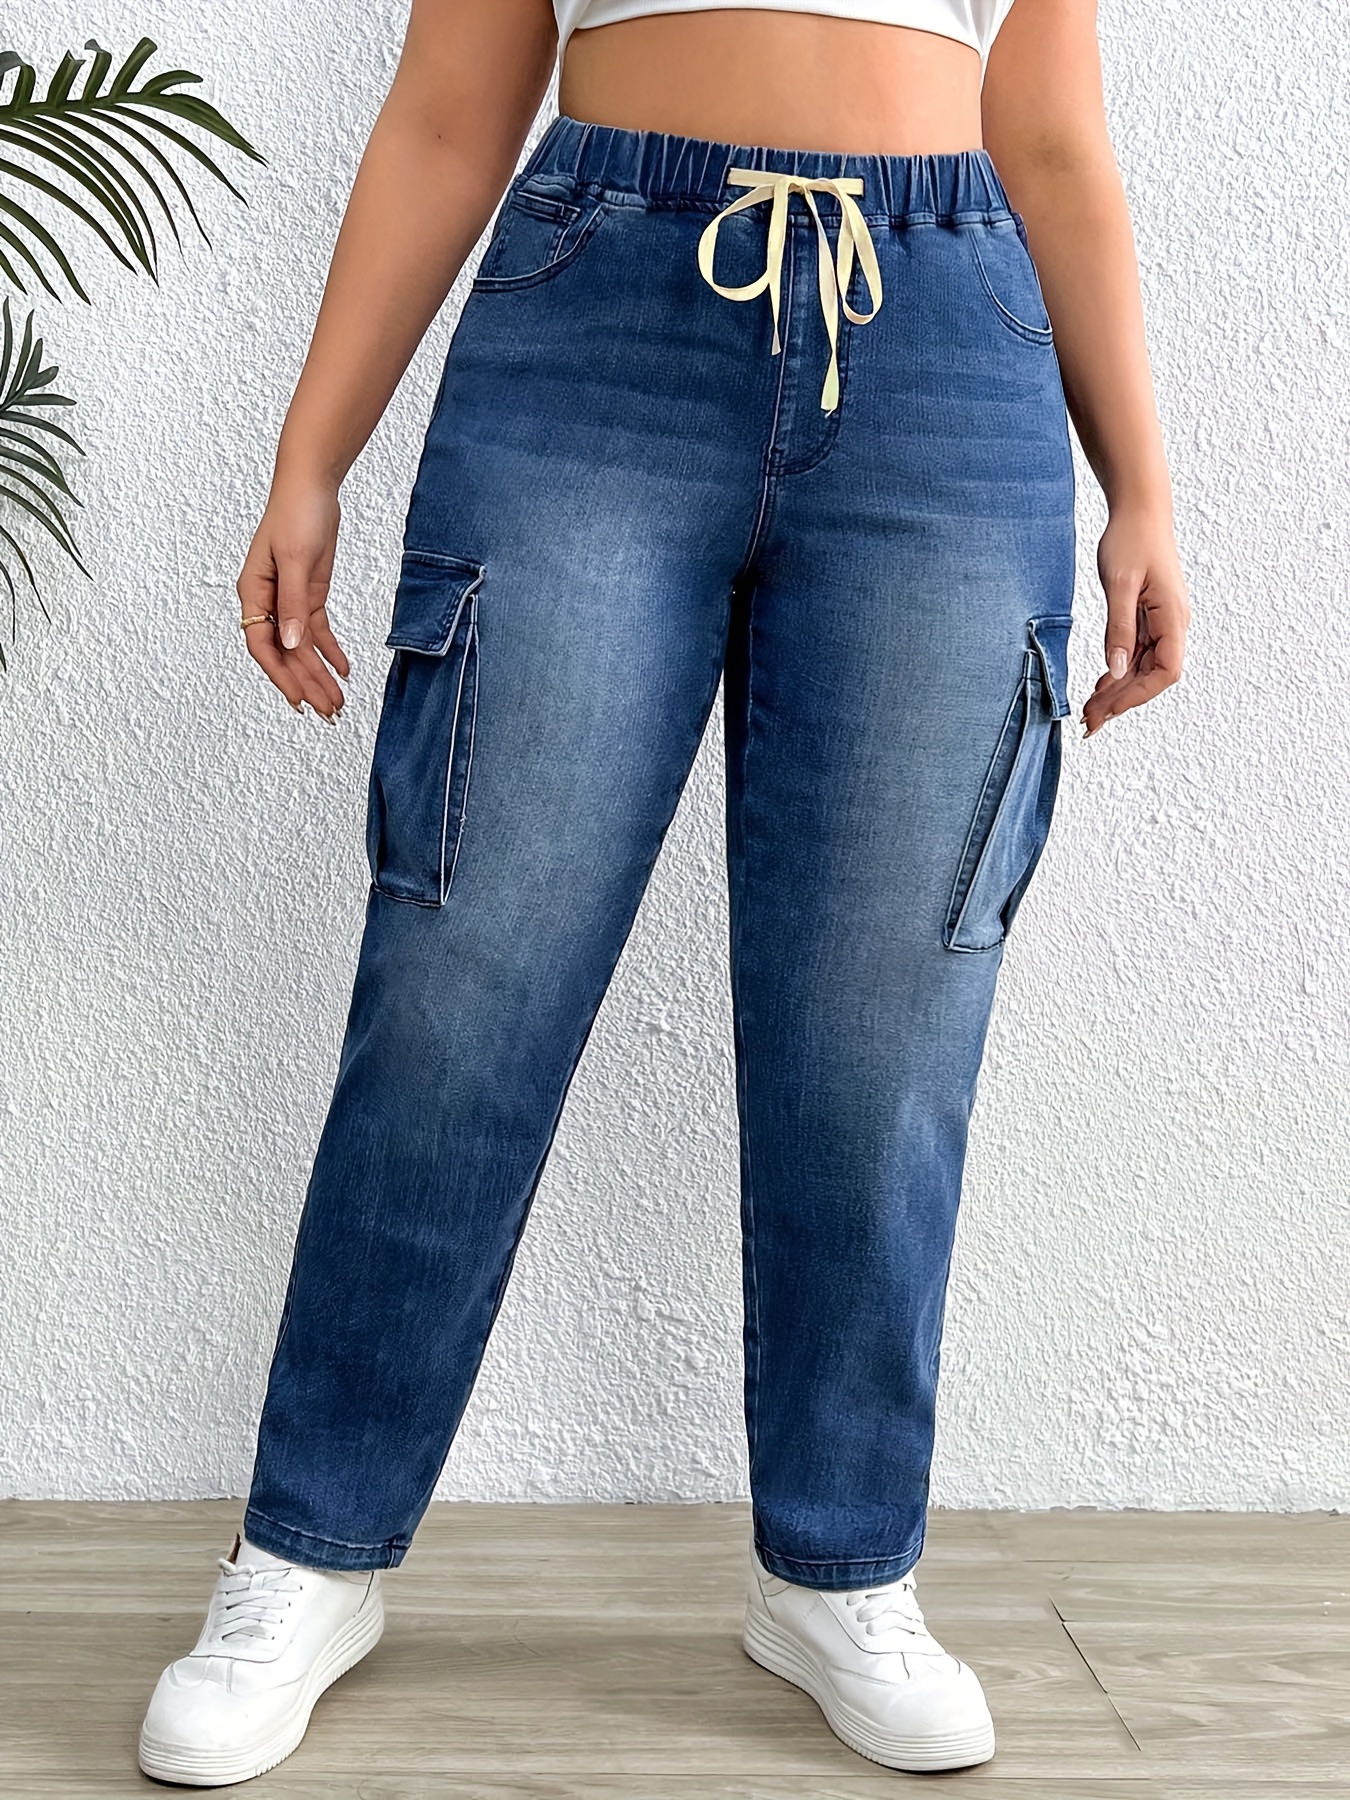 Plus Size Jeans for Women Elastic Waist Band Women Jeans High